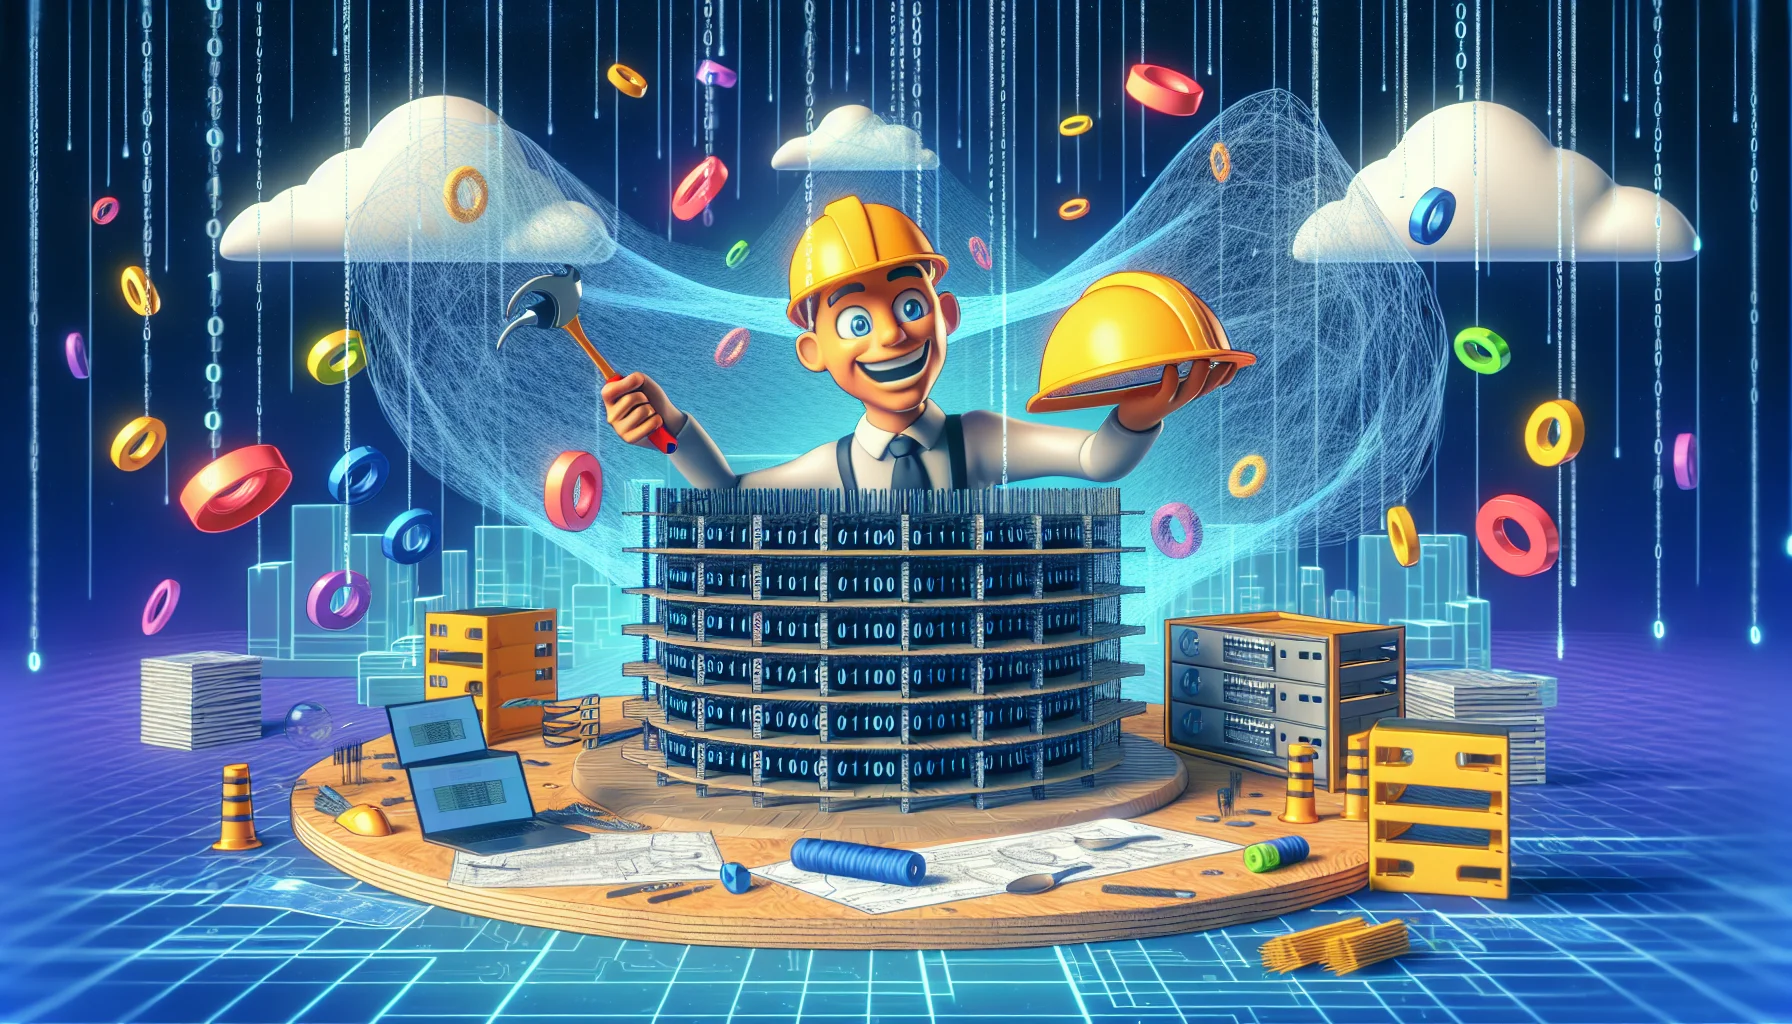 Visualize a comical scene featuring a website builder tool without any branding, portrayed as a character with a jovial demeanor. This character is masterfully constructing a digital web hosting platform, spinning webs made of binary code, with bits and bytes floating around in a setting that is full of vibrant colors. Settings from a construction site are blended in such as hard hats and blueprints but all attuned to the digital theme. Through this fun and playful depiction, viewers should feel enticed about the idea of web hosting.